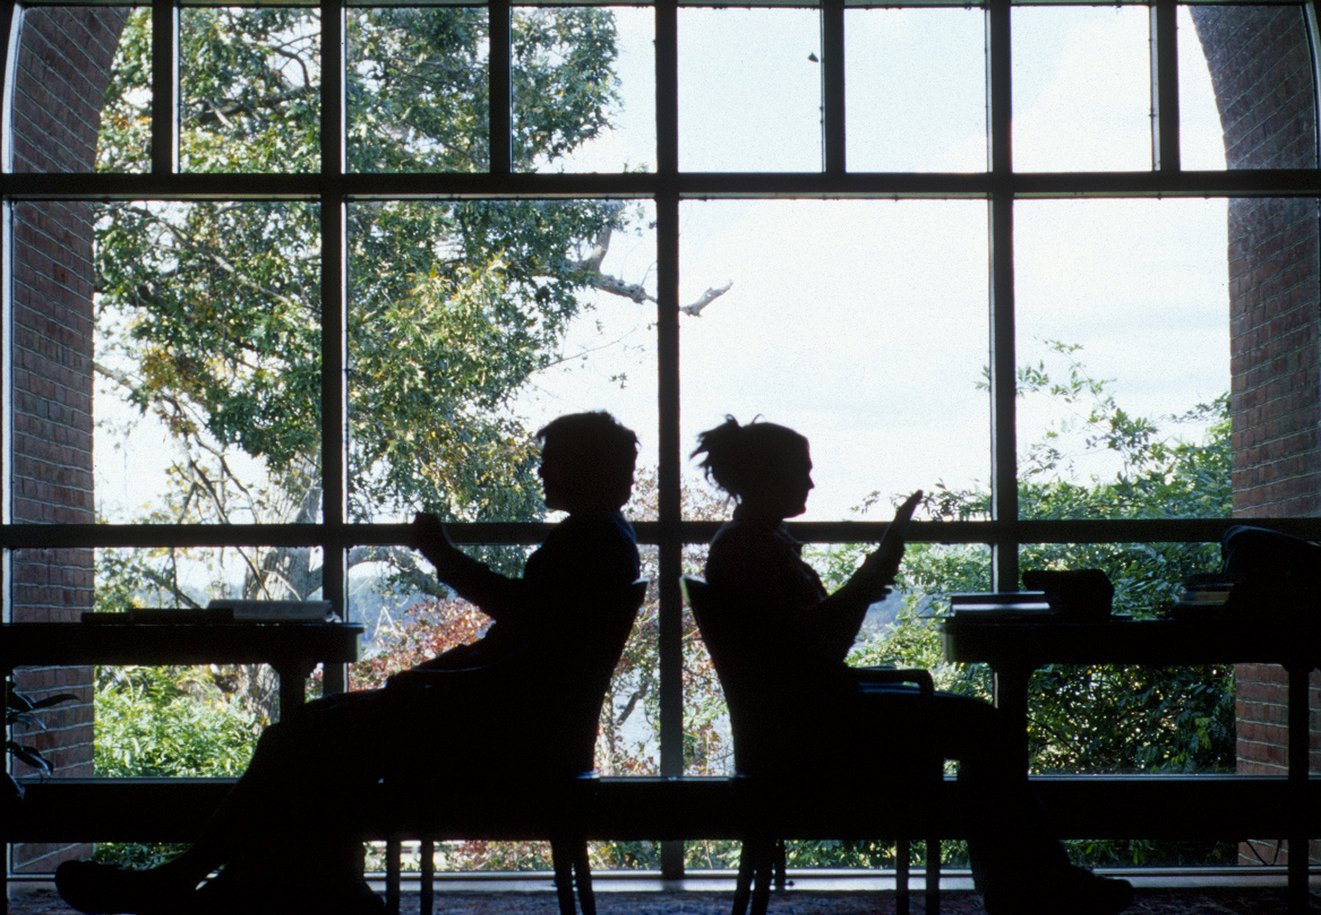 Students sitting in the library, silhouetted by window backdrop